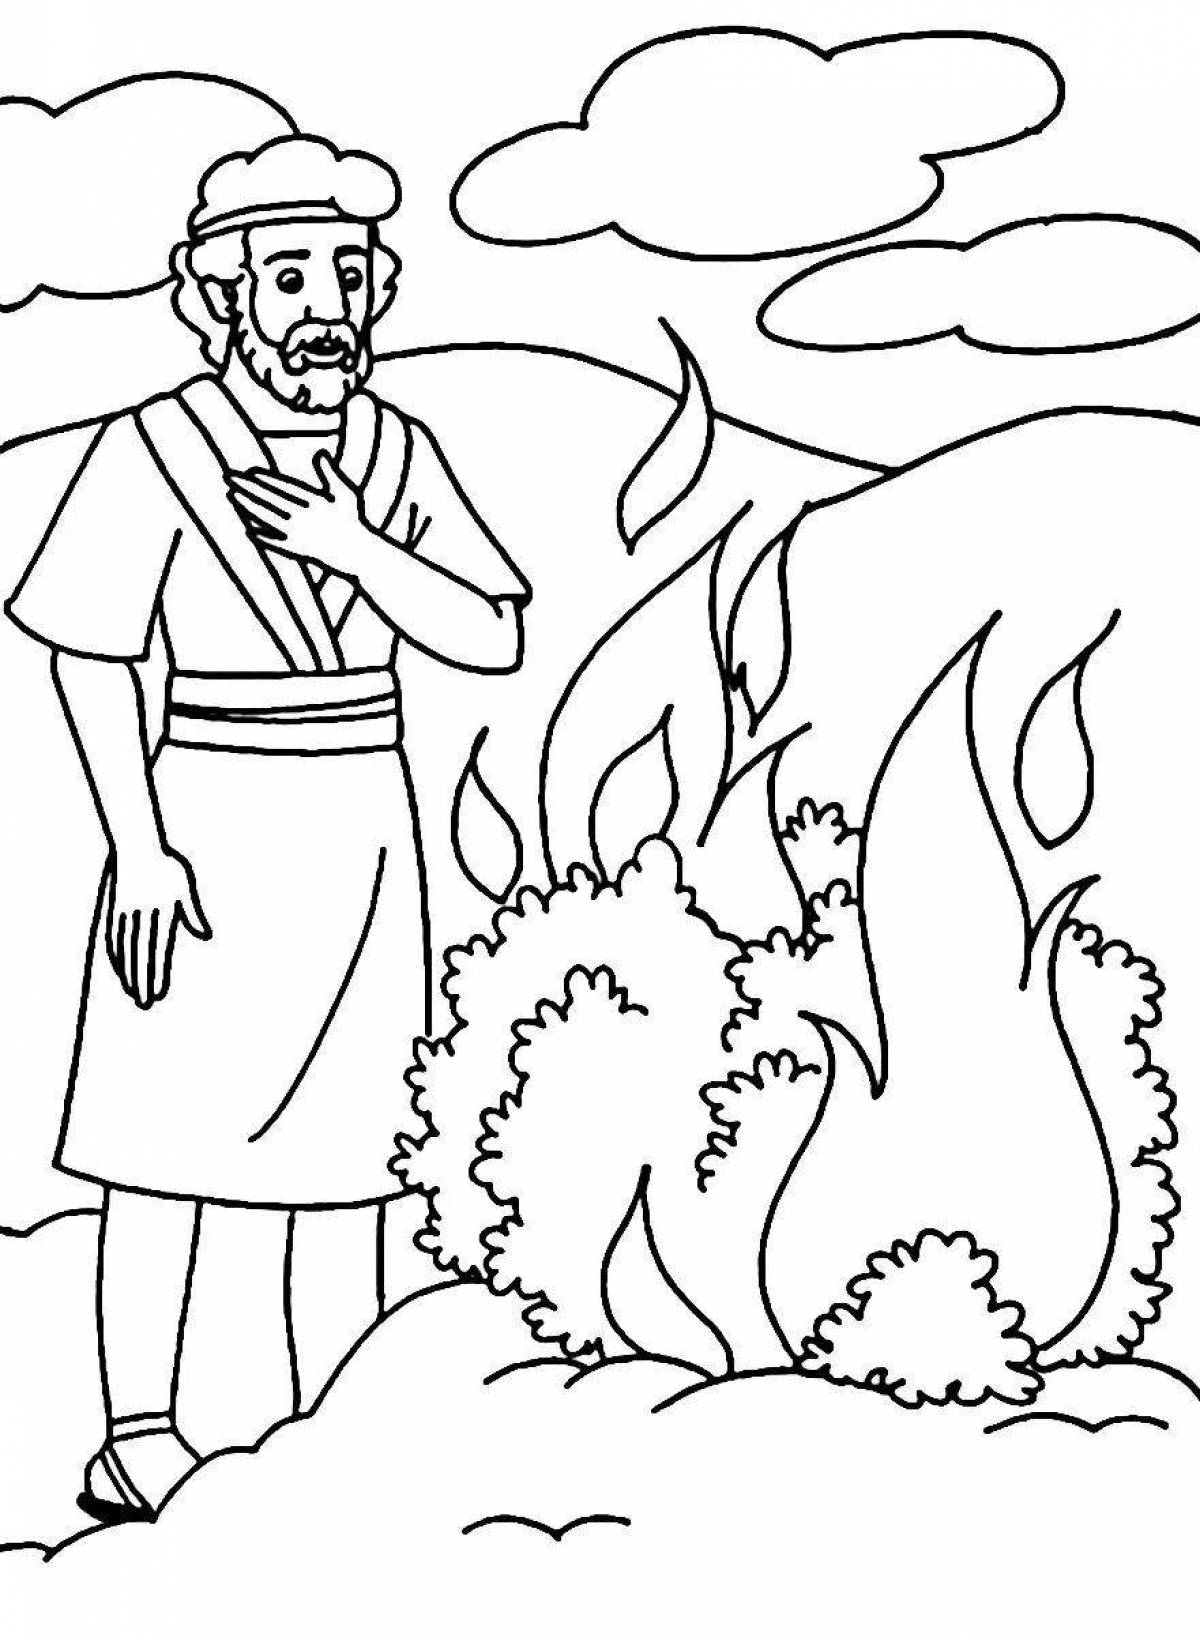 Enemy blazing fire coloring page